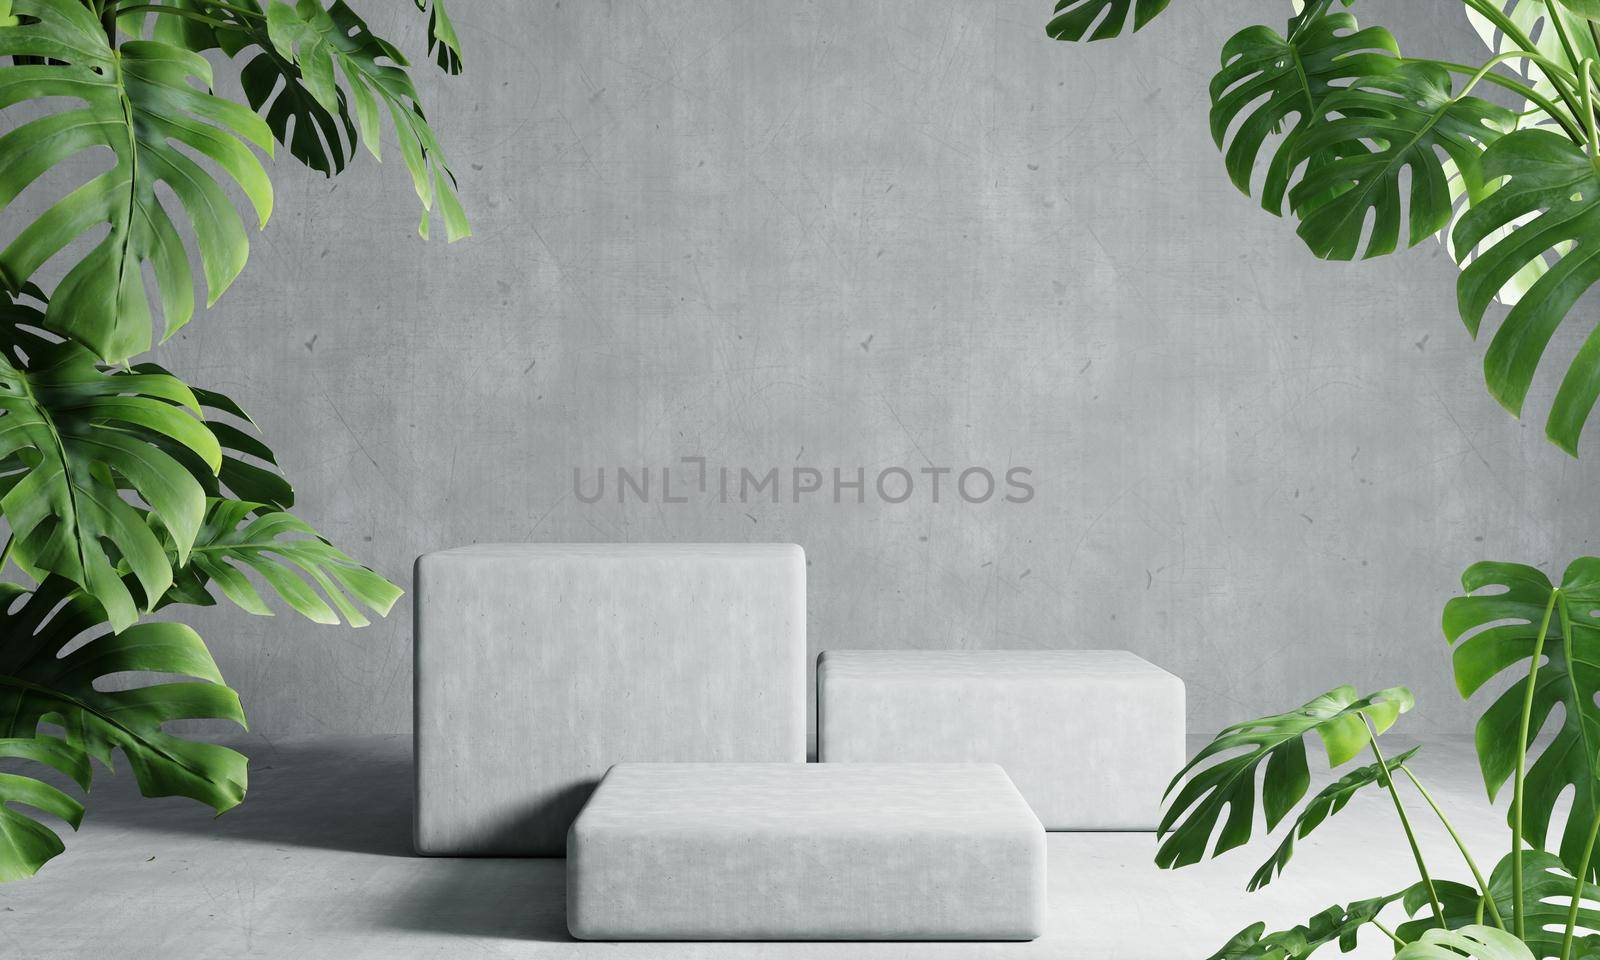 Three rectangle podiums in grey loft color background with Monstera plant foreground. Abstract wallpaper template element and architecture interior object concept.3D illustration rendering